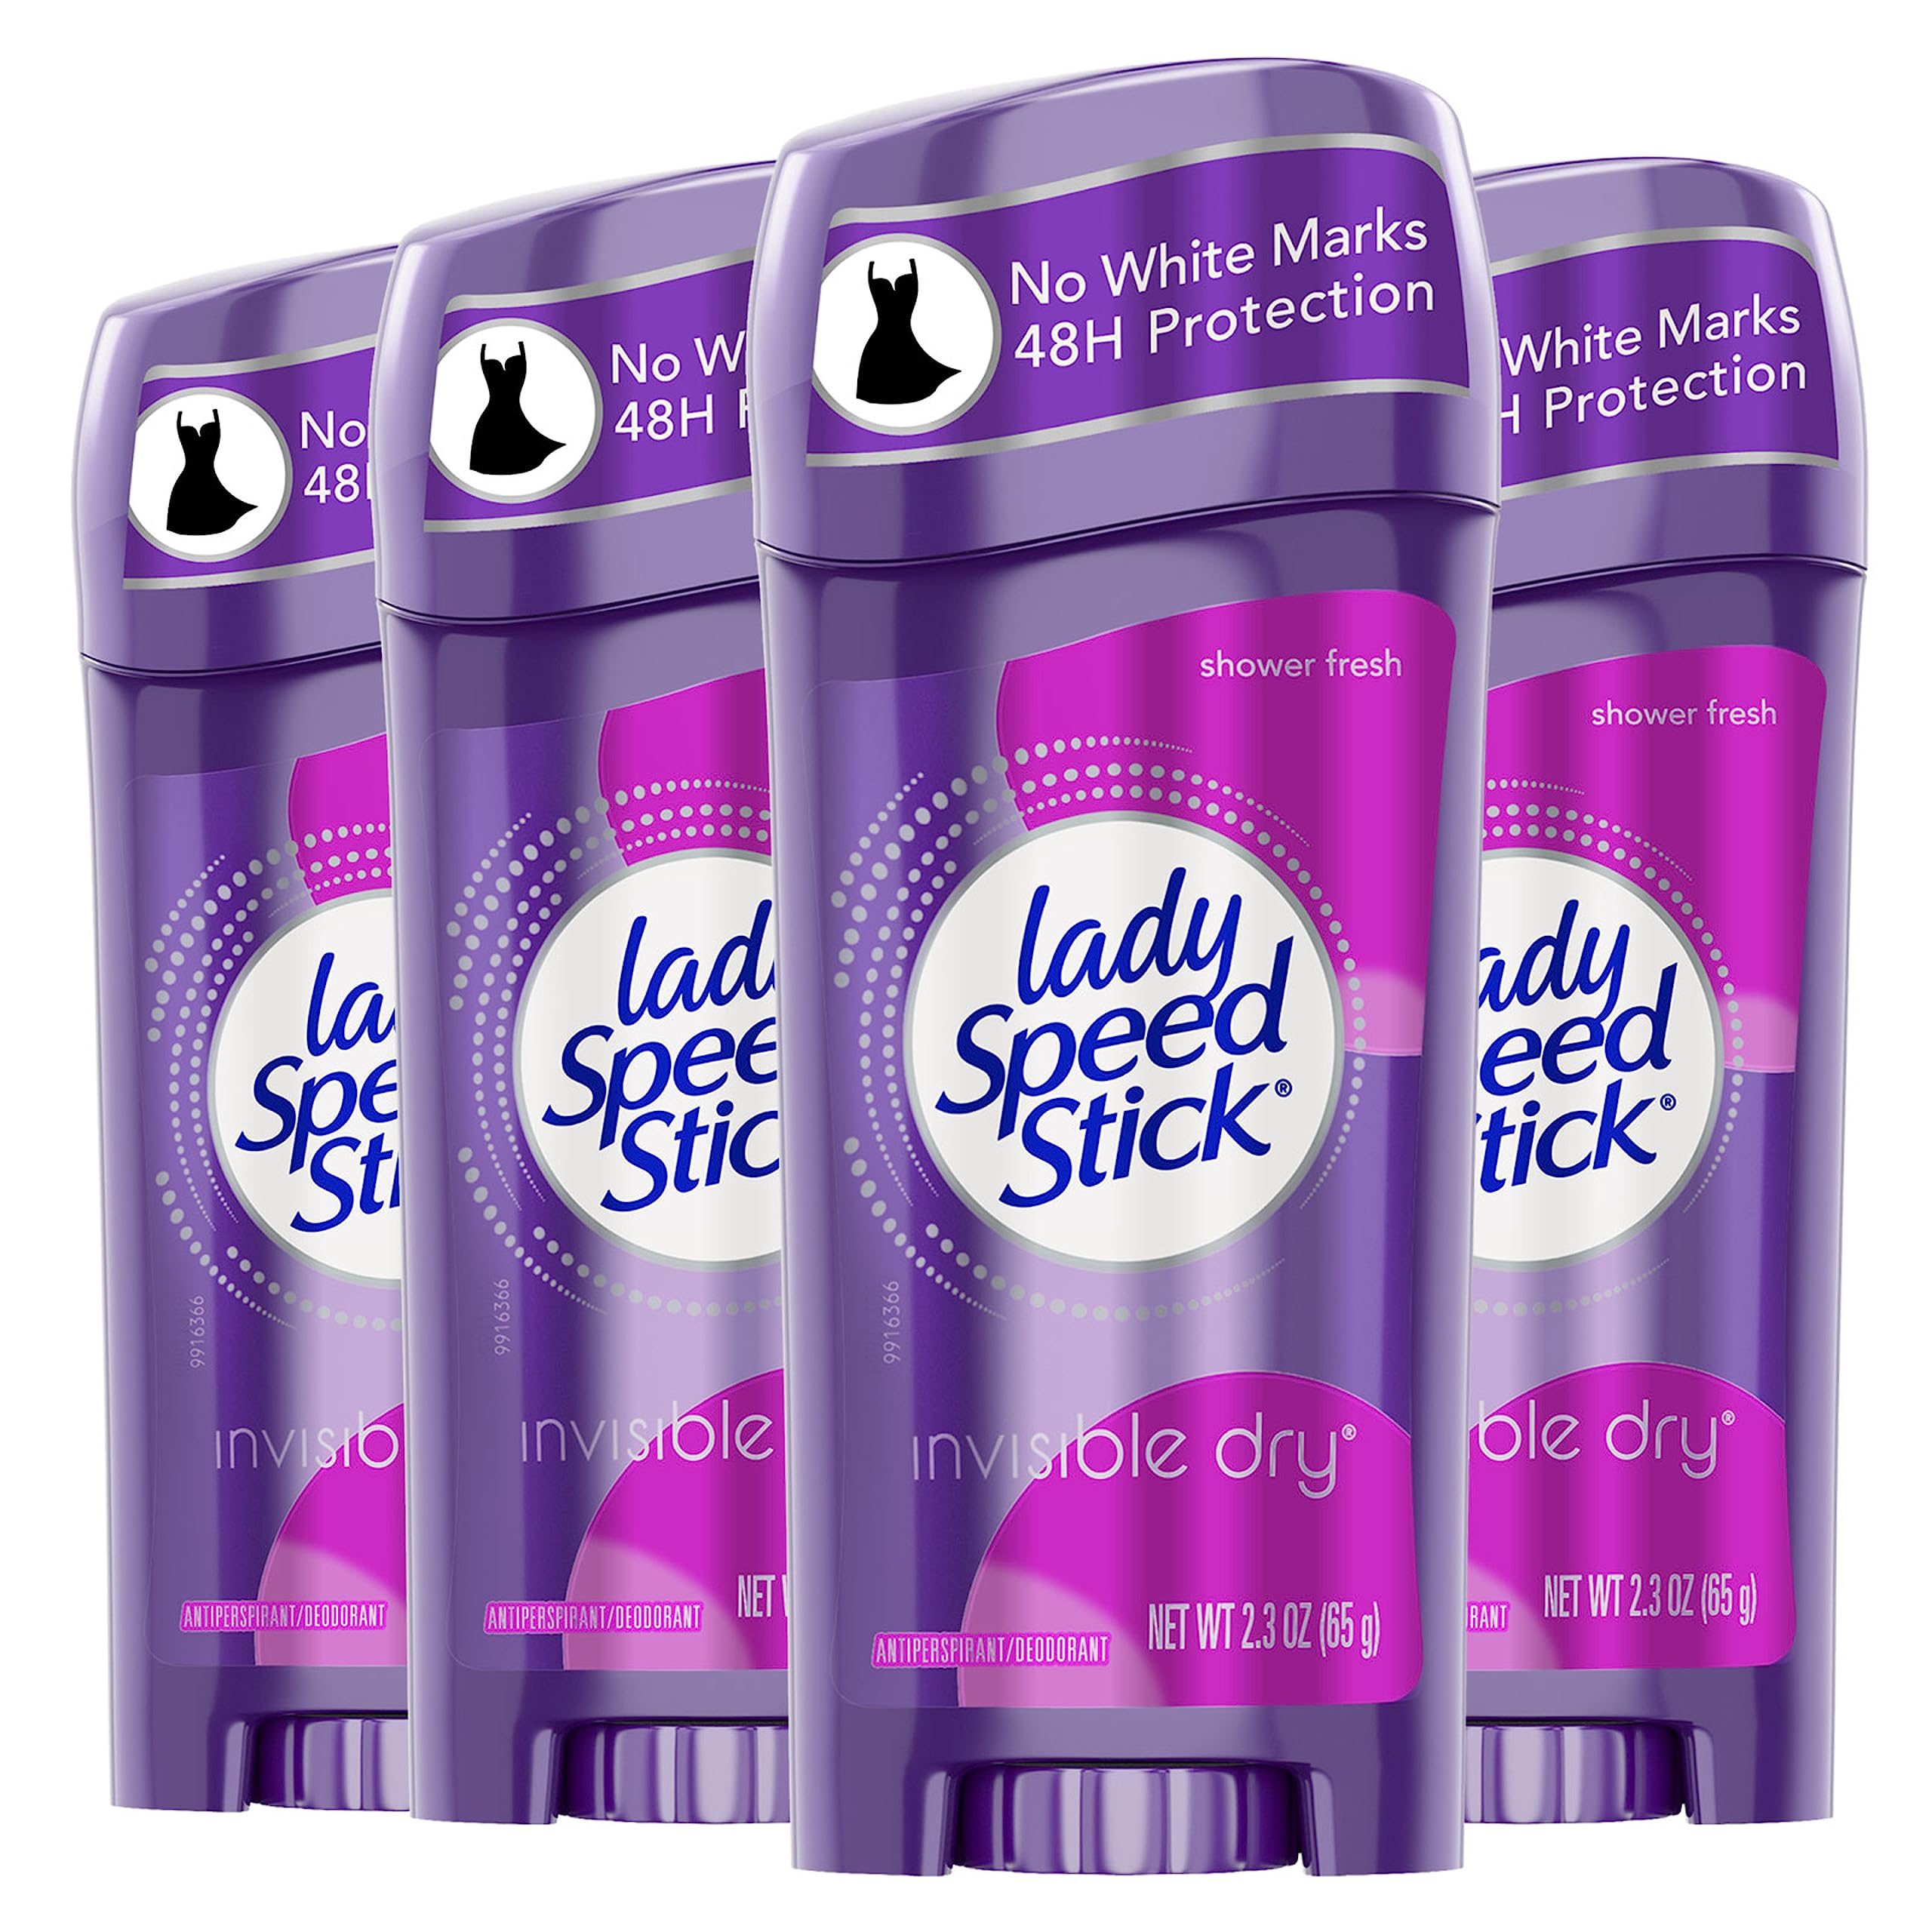 4-Count 2.3-Oz Lady Speed Stick Invisible Dry Antiperspirant Deodorant (Shower Fresh) $5.40 w/ S&S + Free Shipping w/ Prime or on $25+